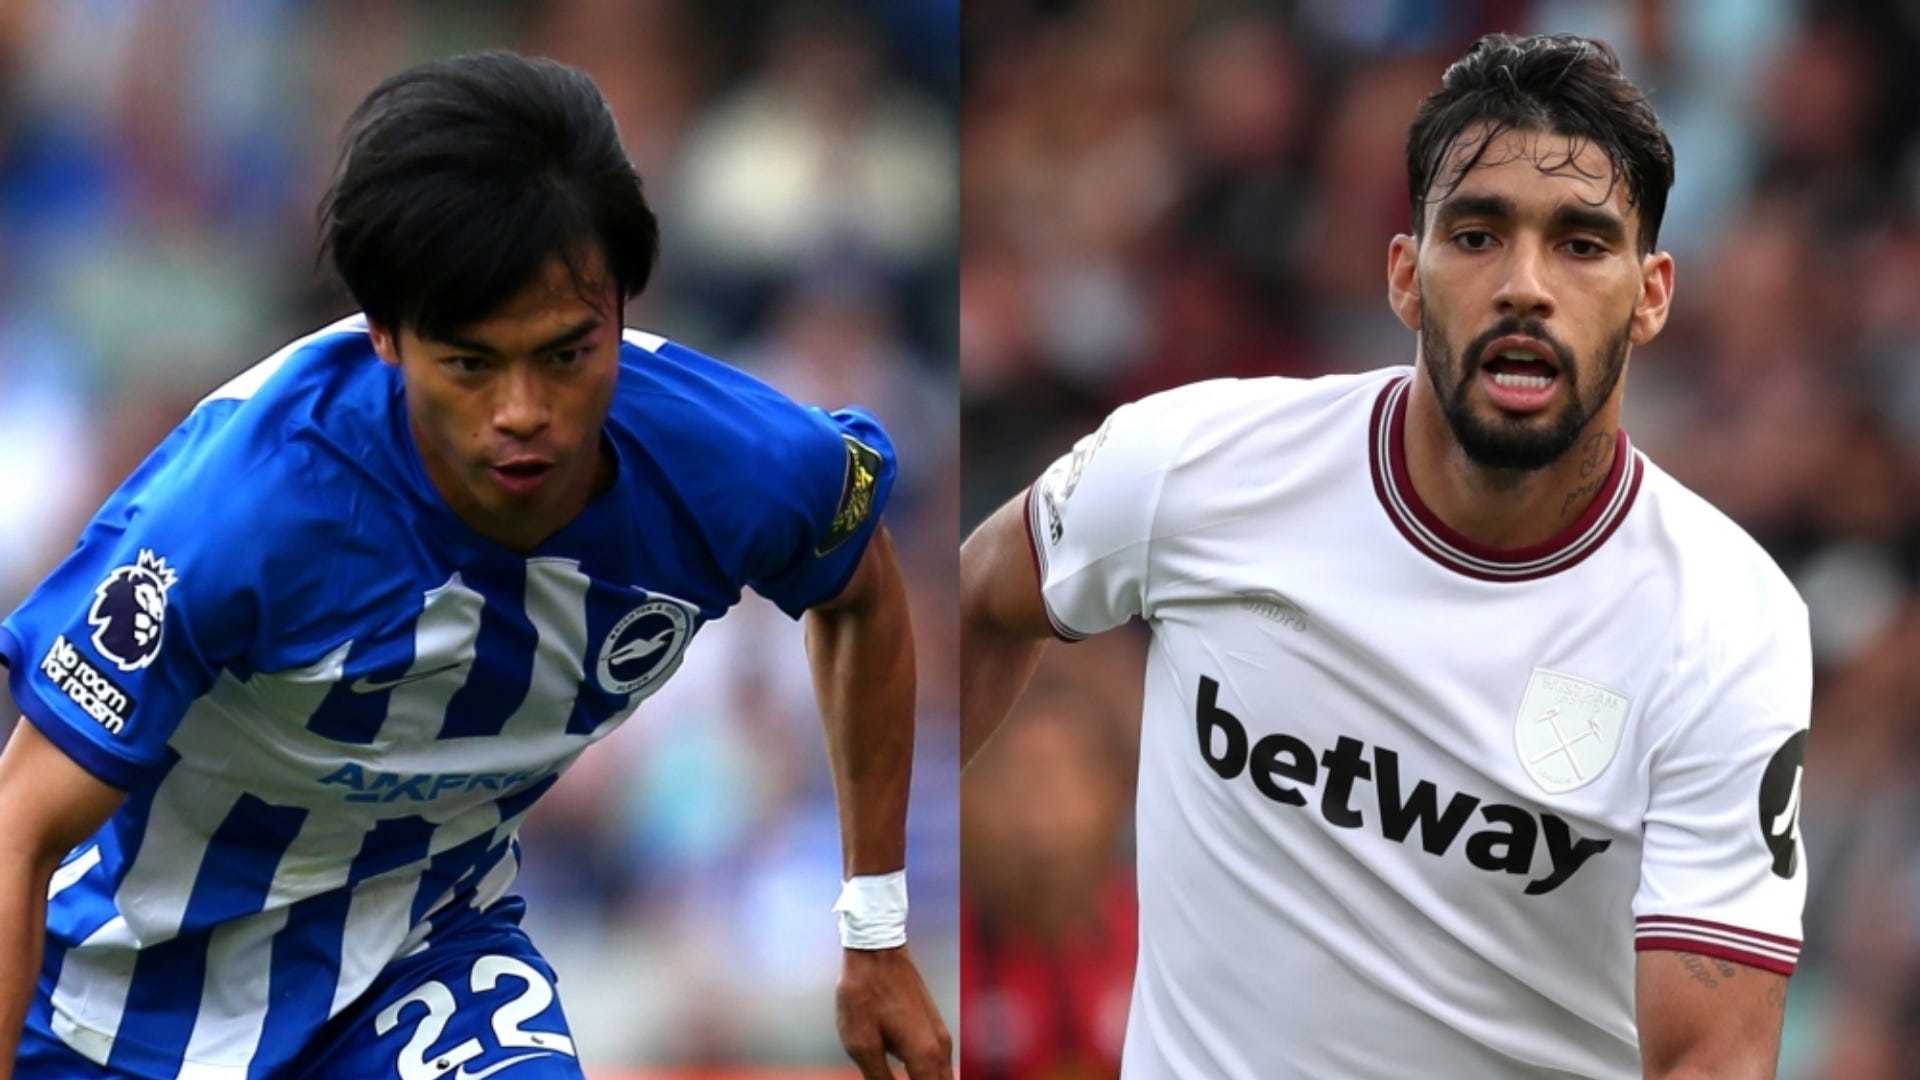 Brighton vs West Ham Live stream, TV channel, kick-off time and where to watch Goal English Bahrain